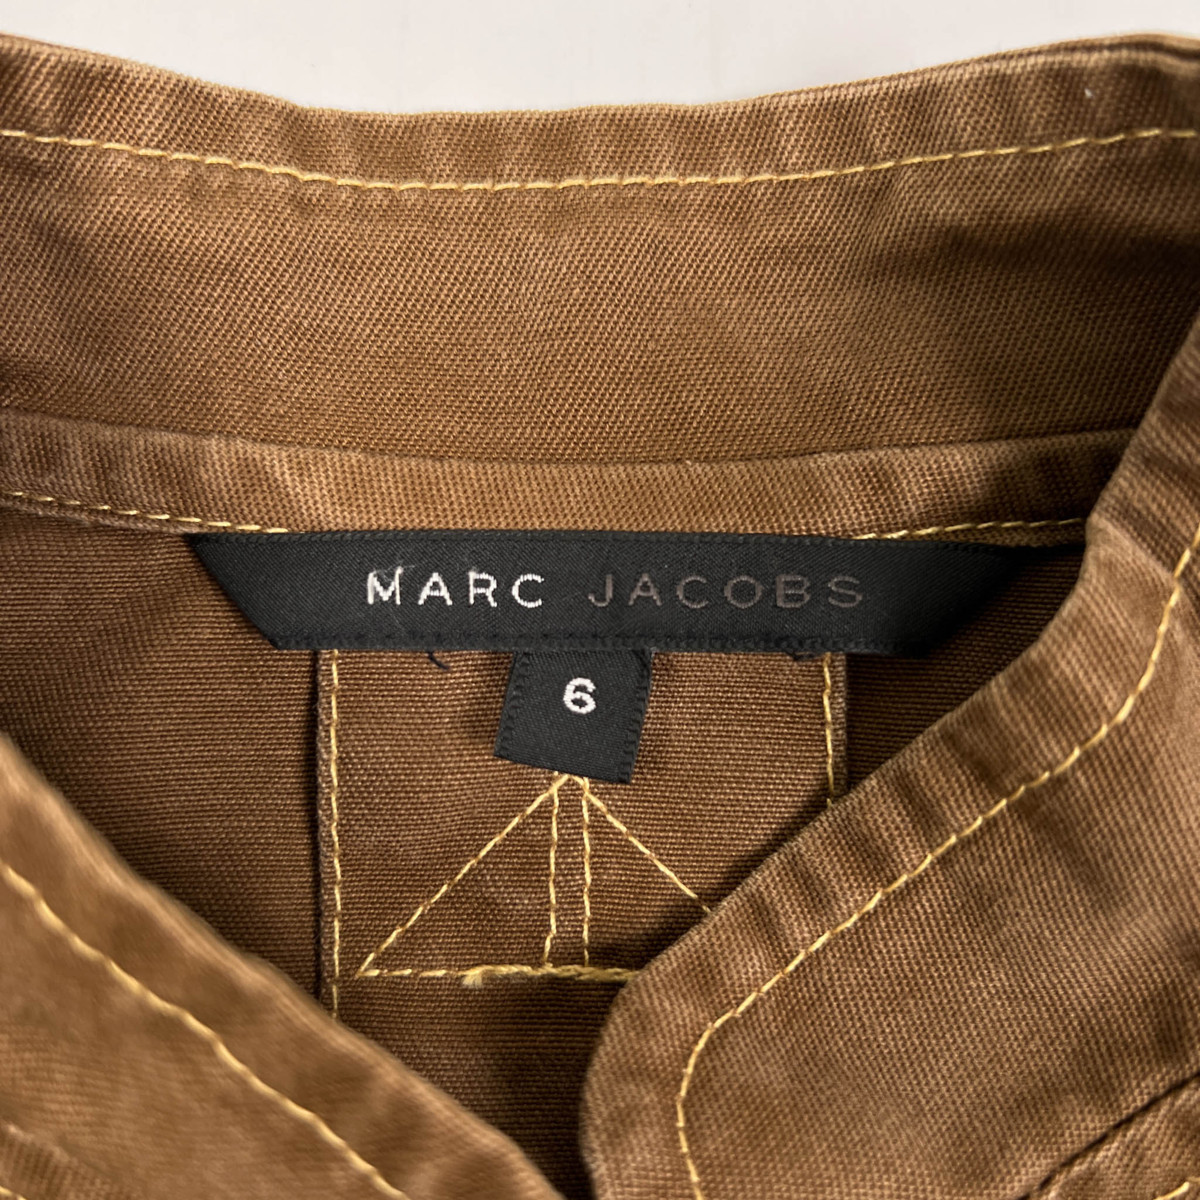 SALE／65%OFF】【SALE／65%OFF】新品未使用 Marc Jacobs ブルゾン 